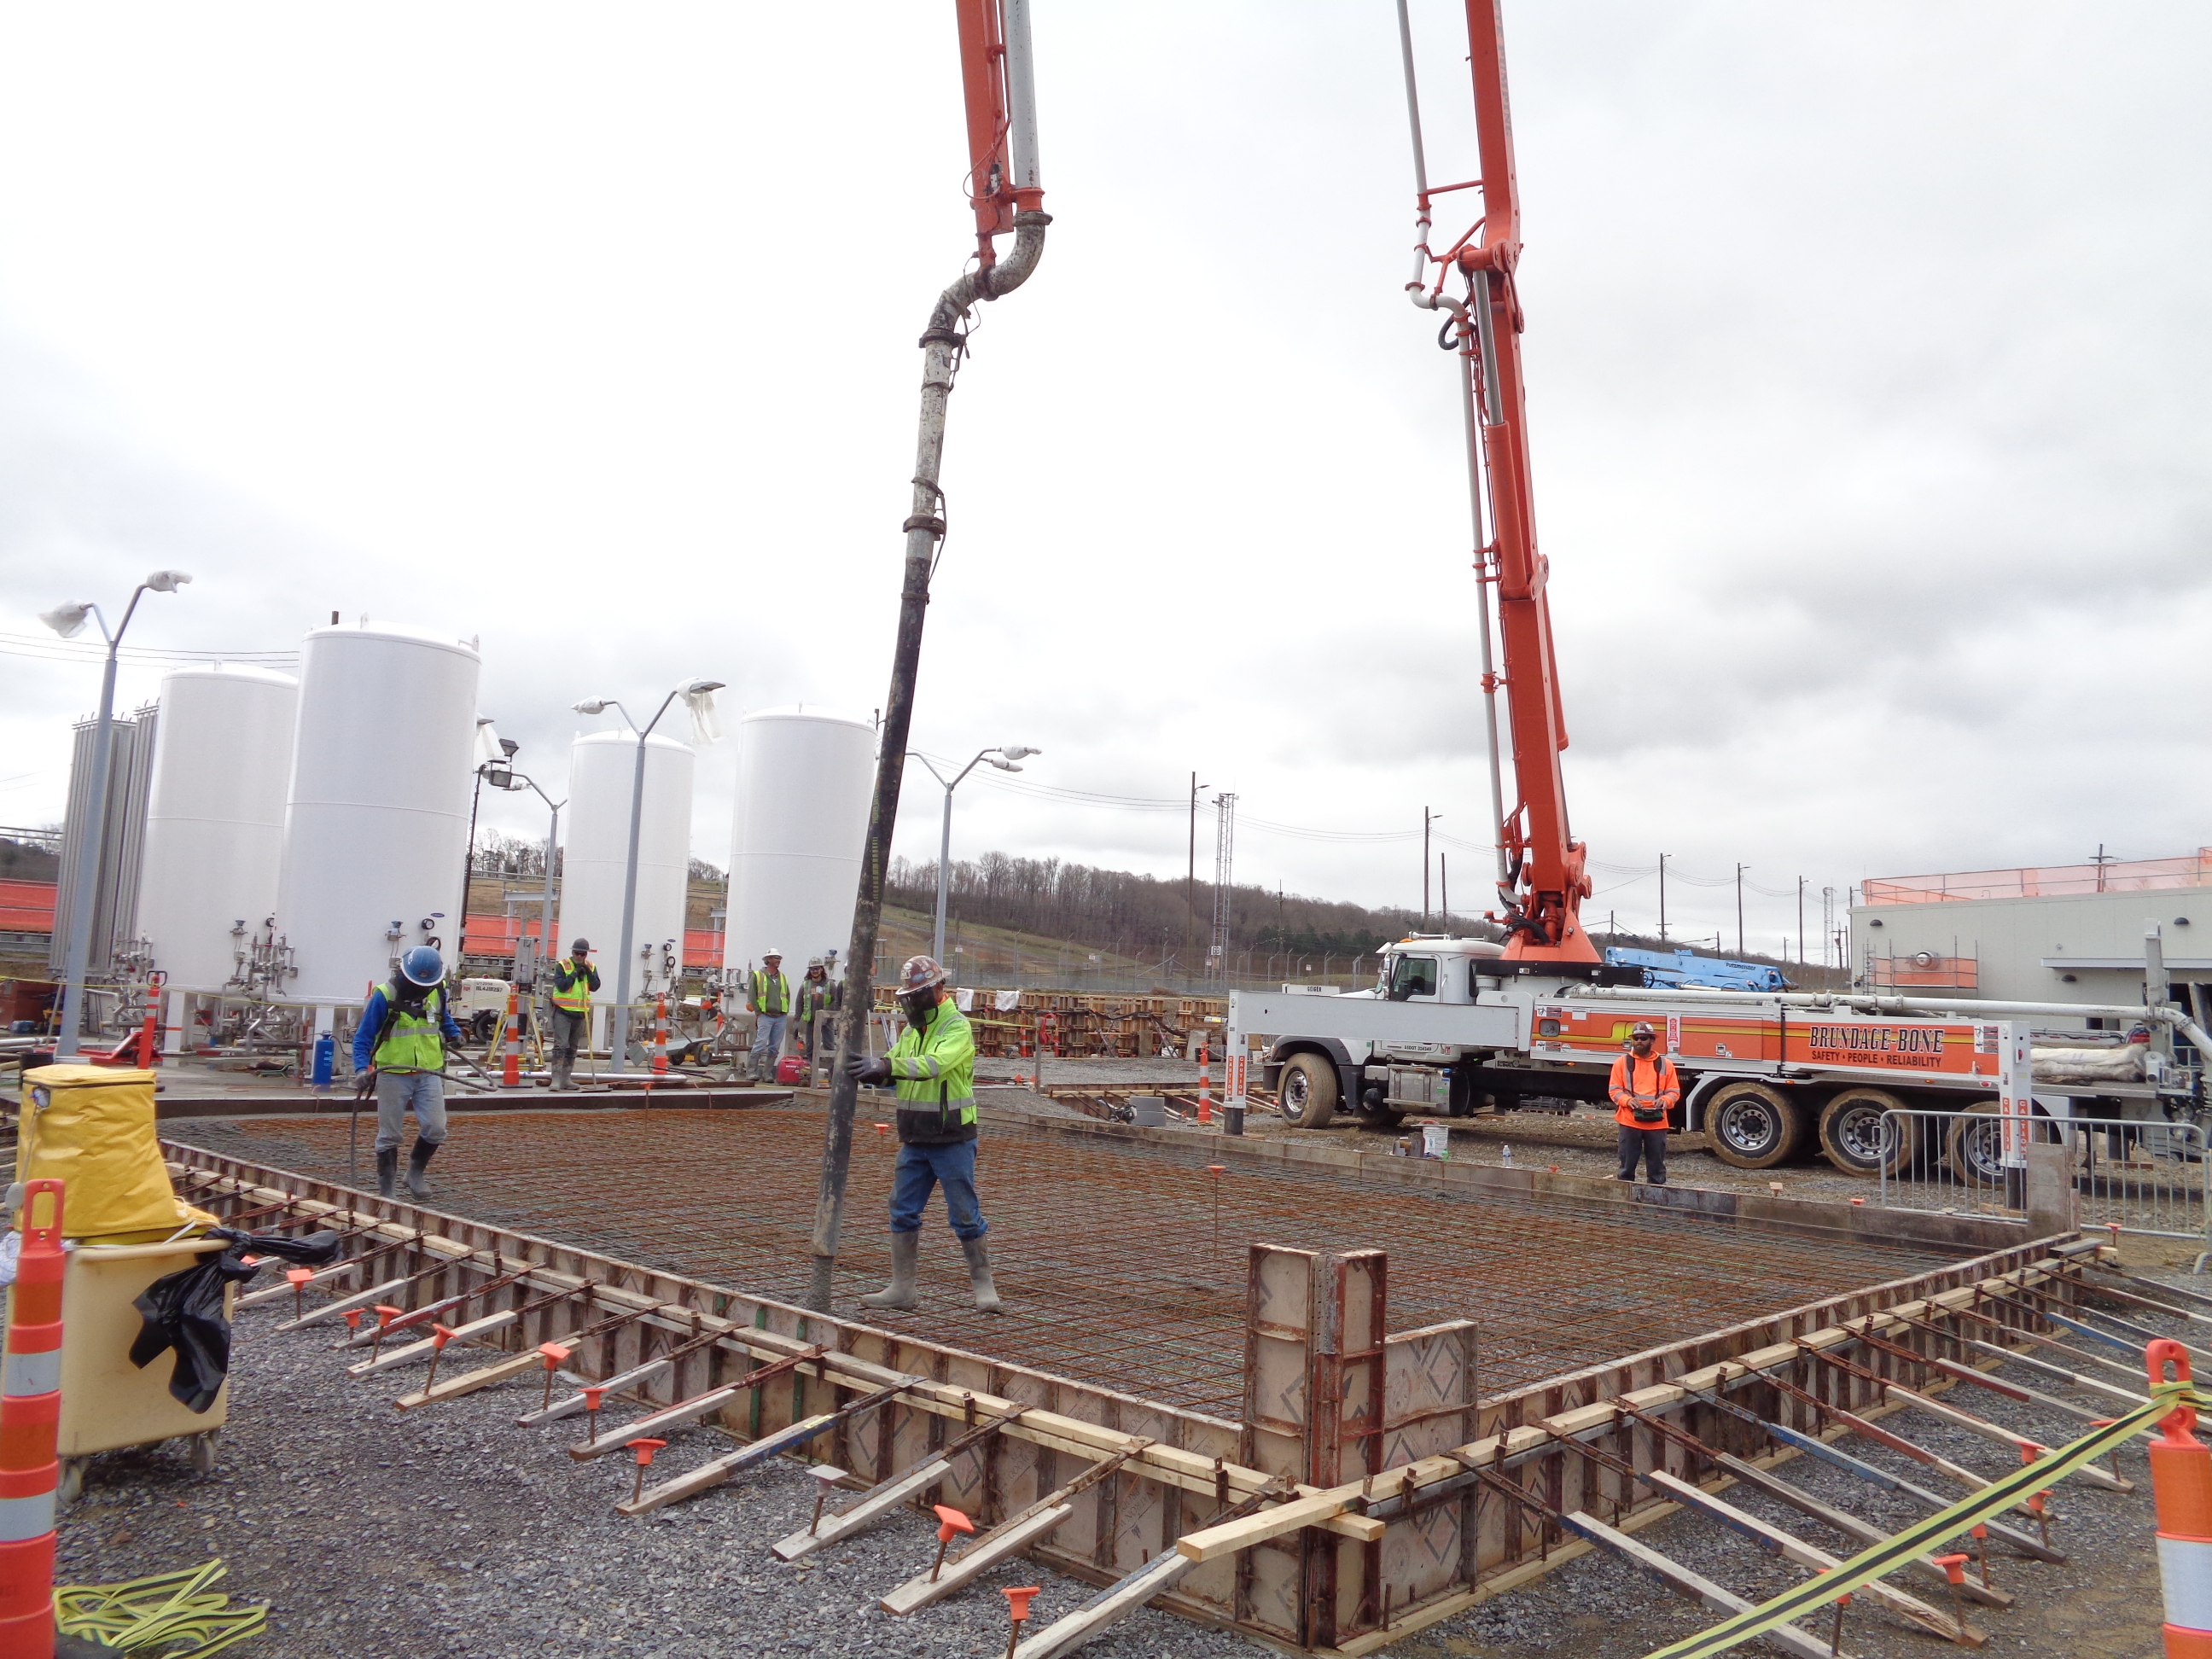 Process Support Facilities process gas yard north pad concrete placement 